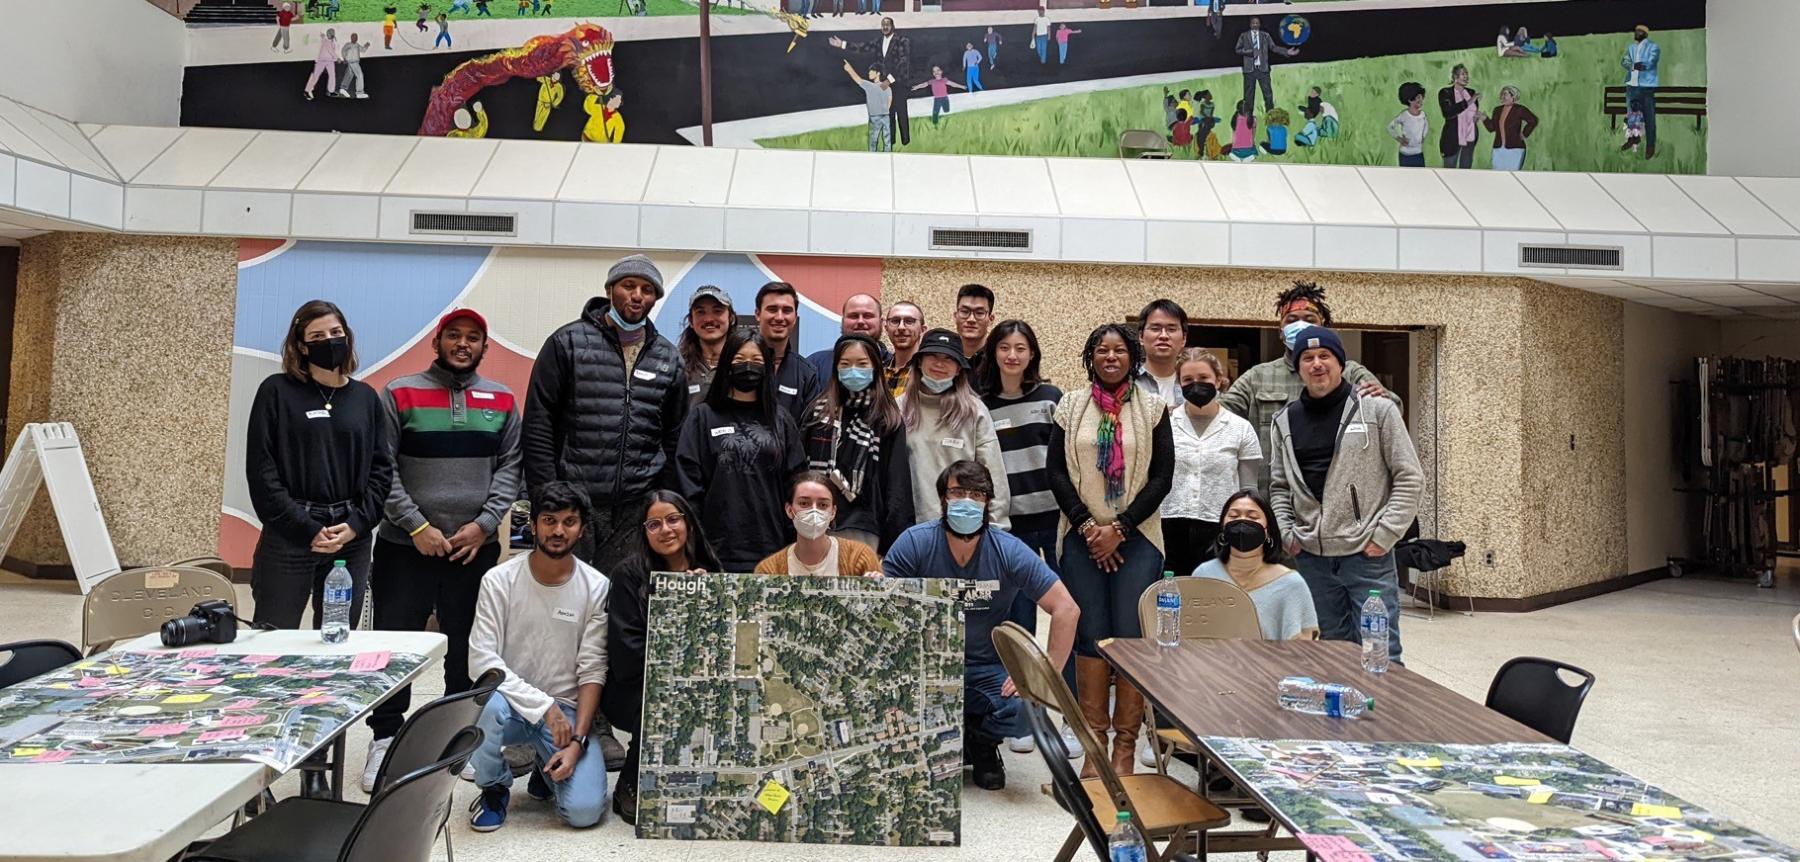 class group, teacher and project partners posing with city plans indoors with tables and chairs